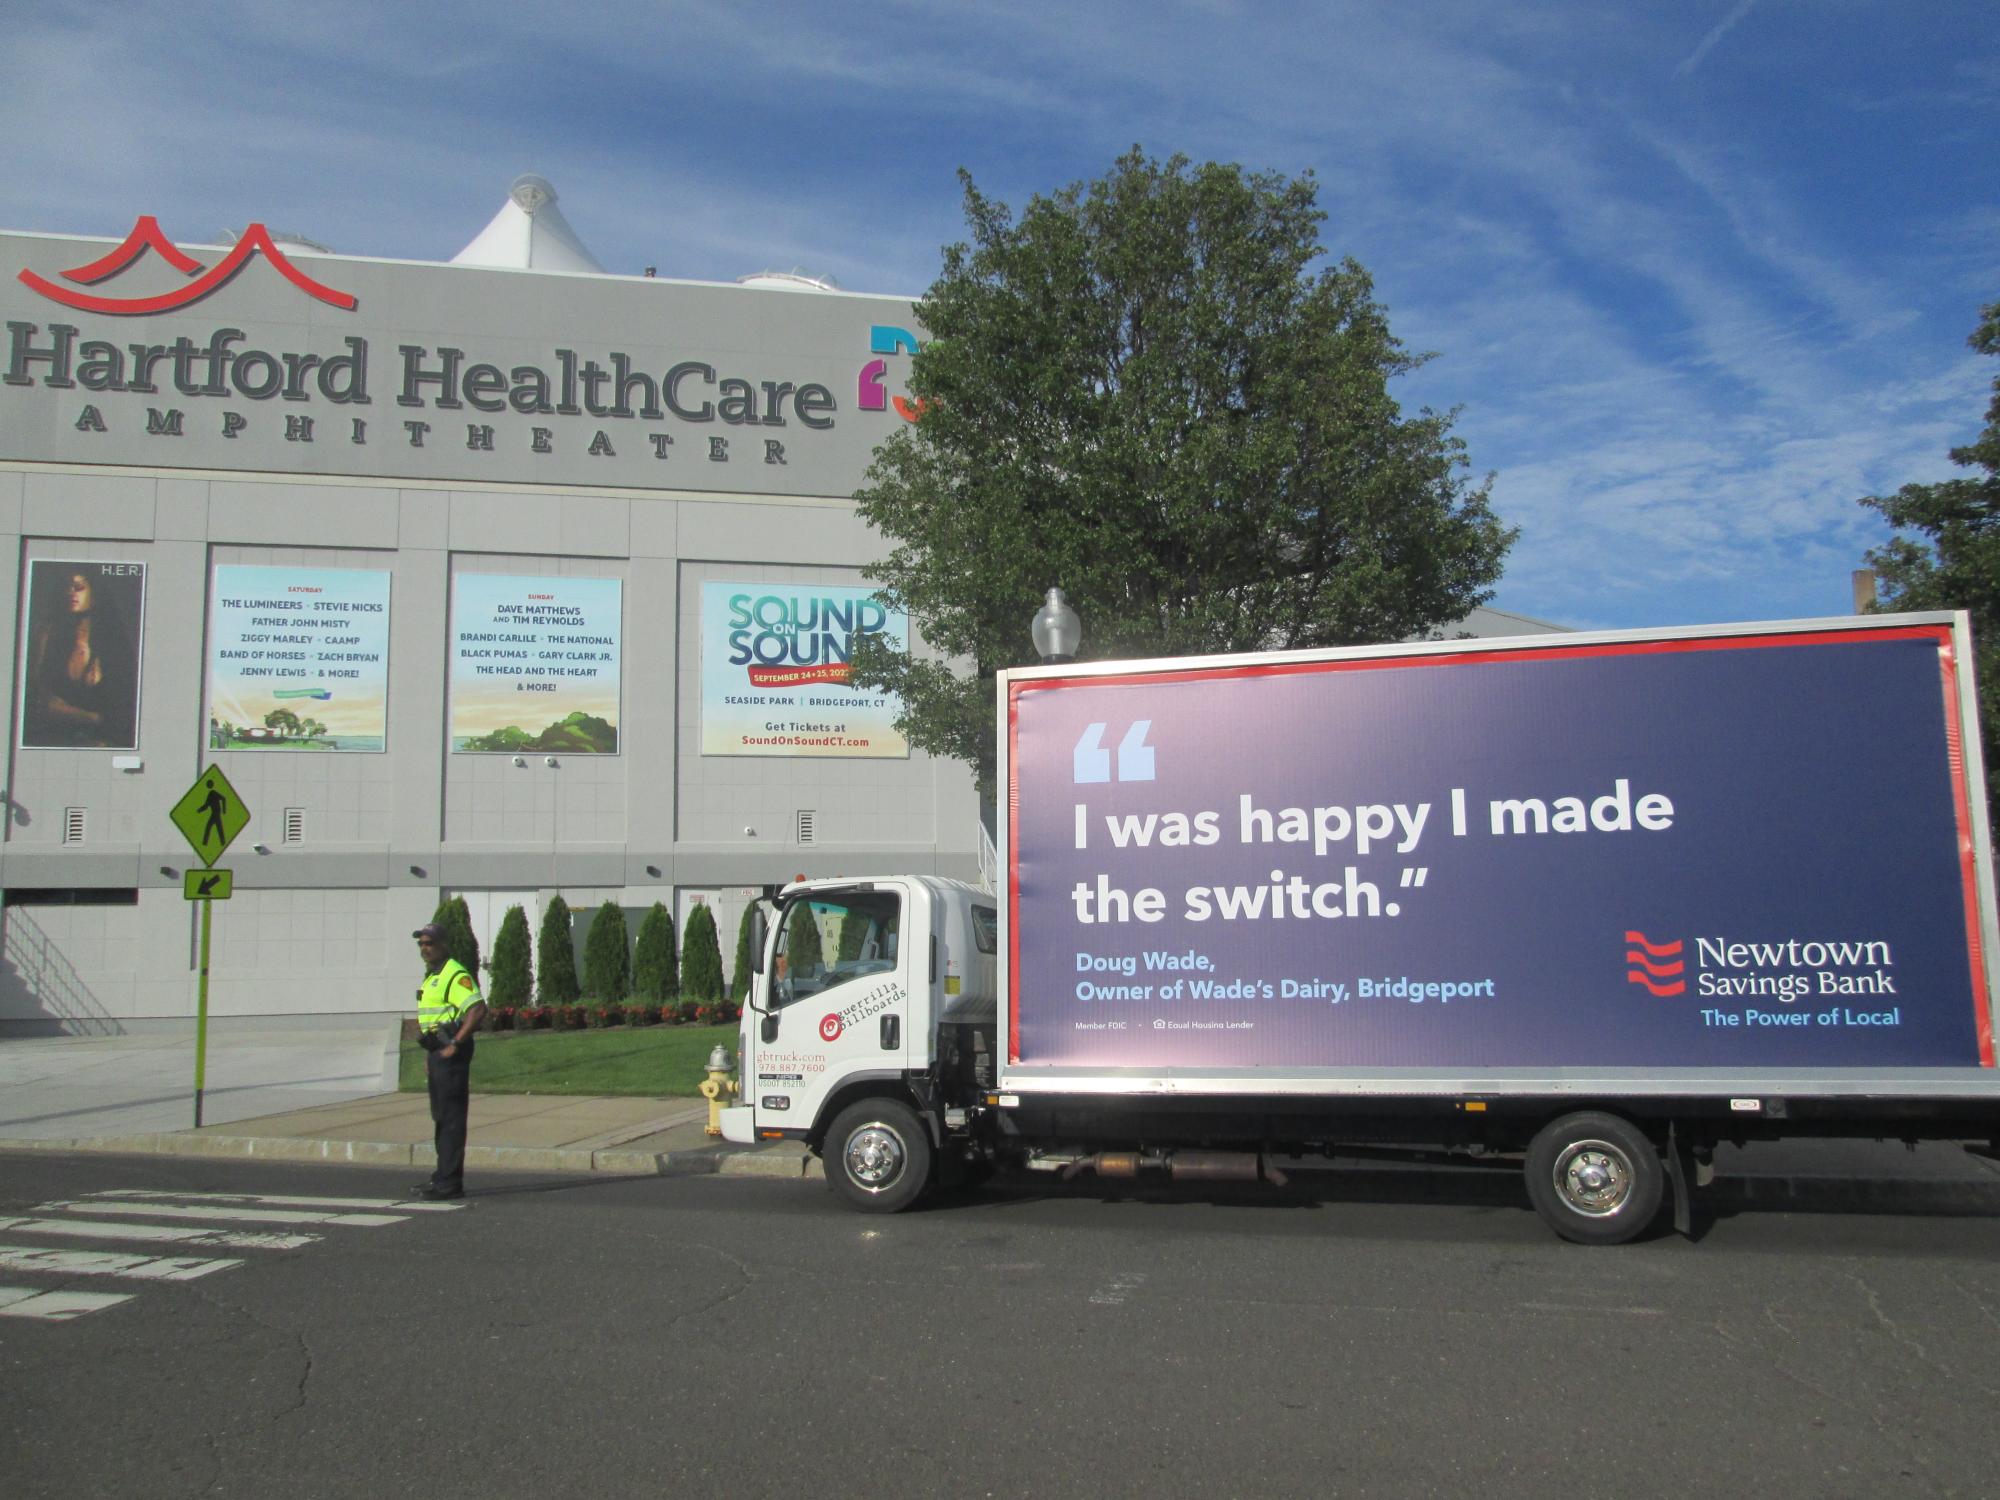 Mobile ad truck in Bridgeport CT during August 2022.